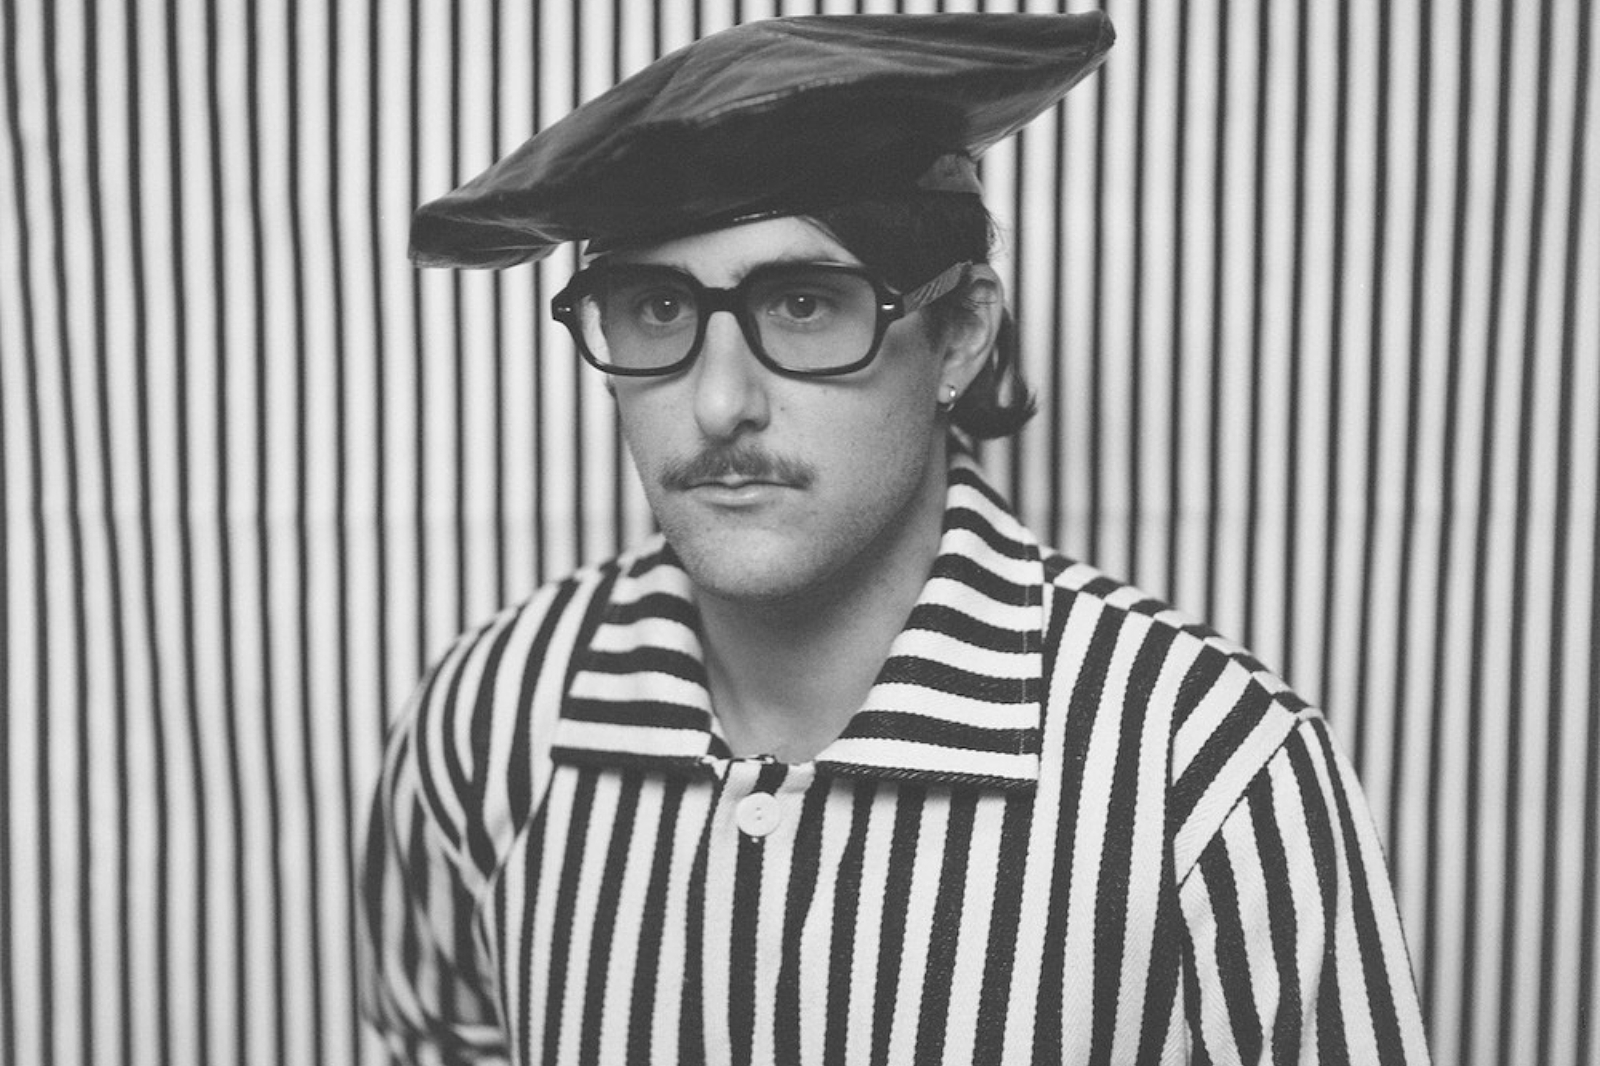 Zac Farro: "[The new record is] a new venture for HalfNoise"